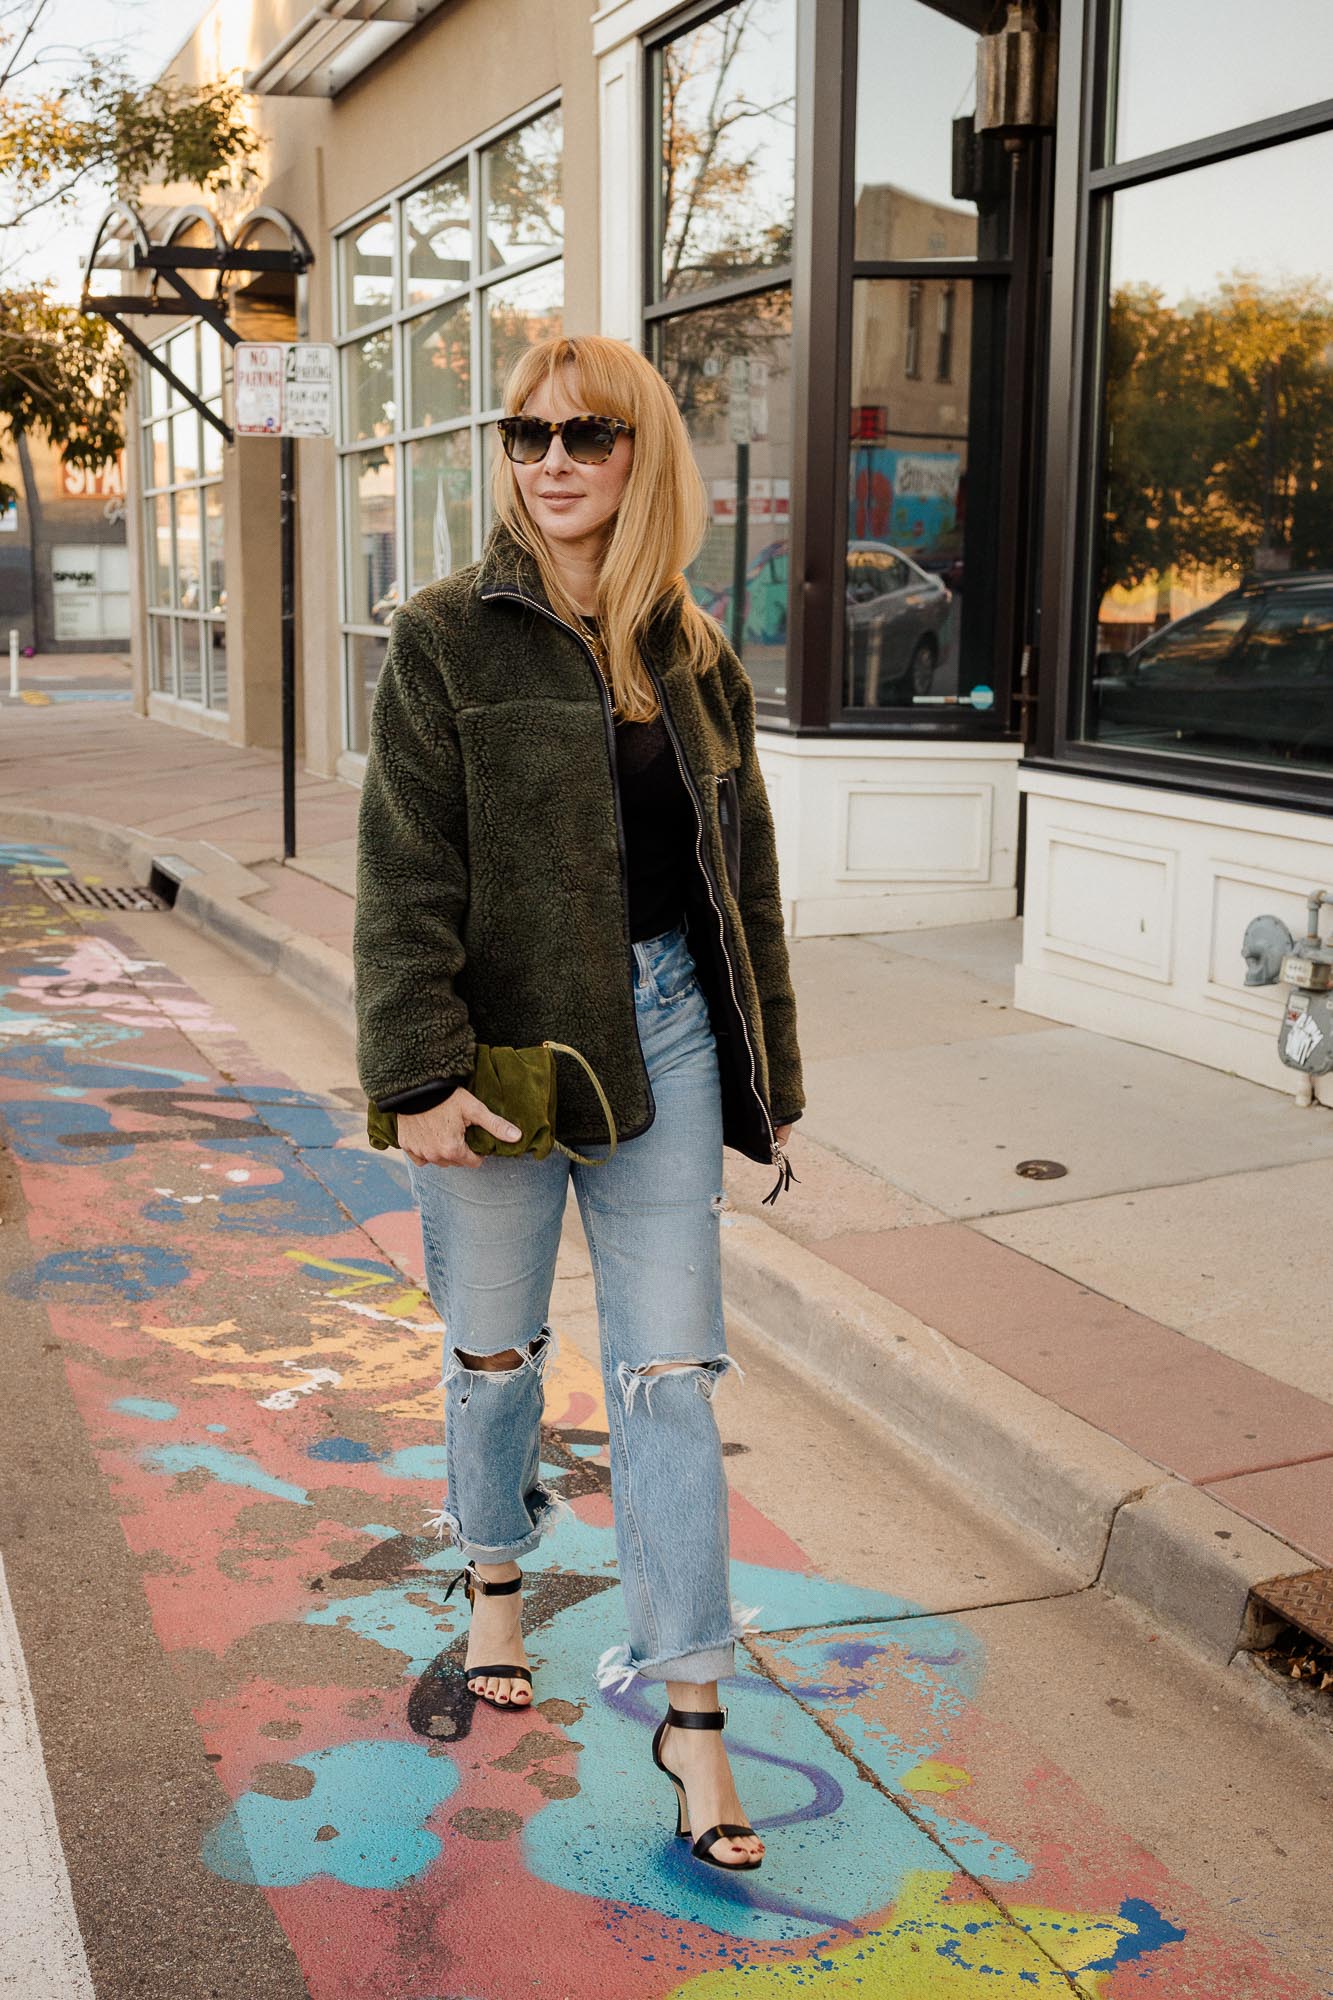 Wearing the Anine Bing Ryder jacket with Moussy jeans and an olive Staud bag and black heels.